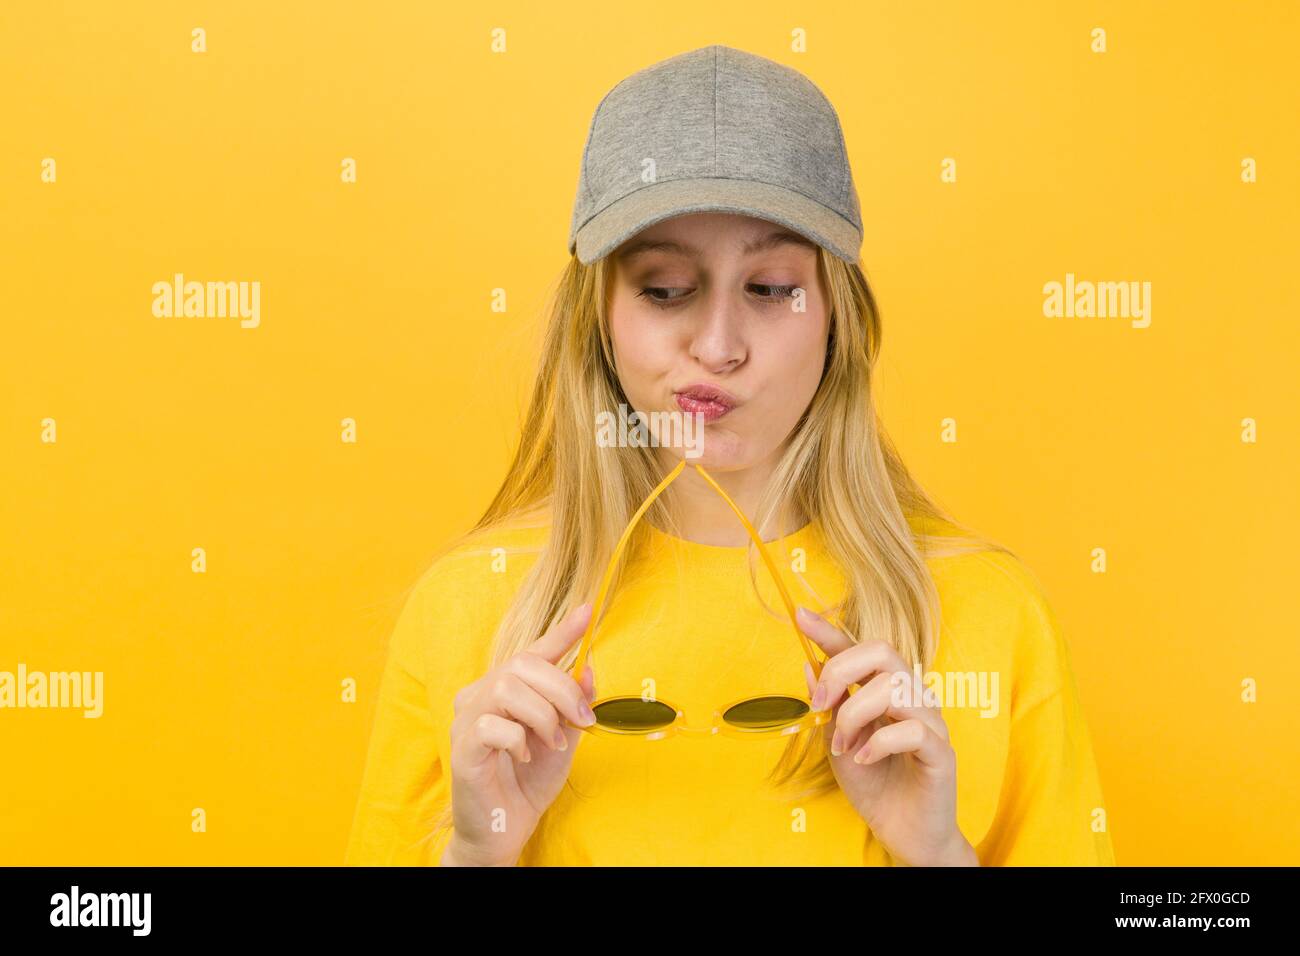 Perplexed Woman in yellow sweater and cap holding stylish sunglasses while standing on yellow background Stock Photo